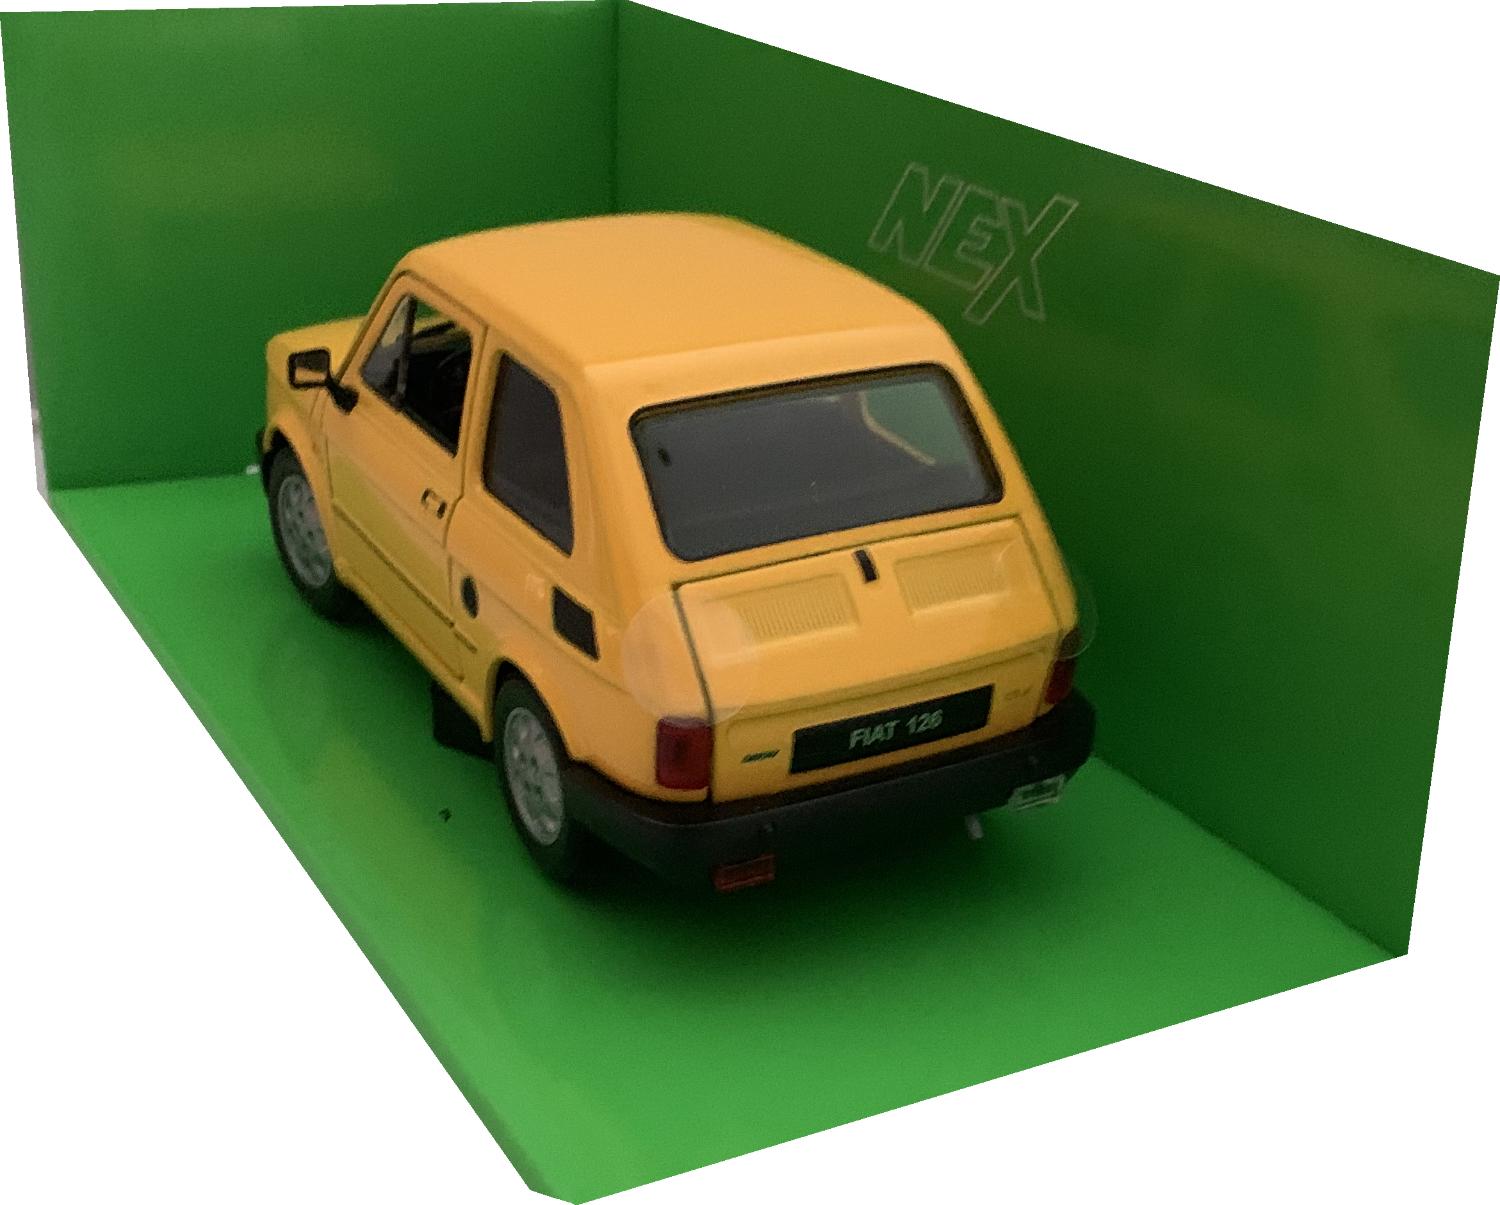 Fiat 126 in yellow 1:24 scale diecast model from Welly / NEX